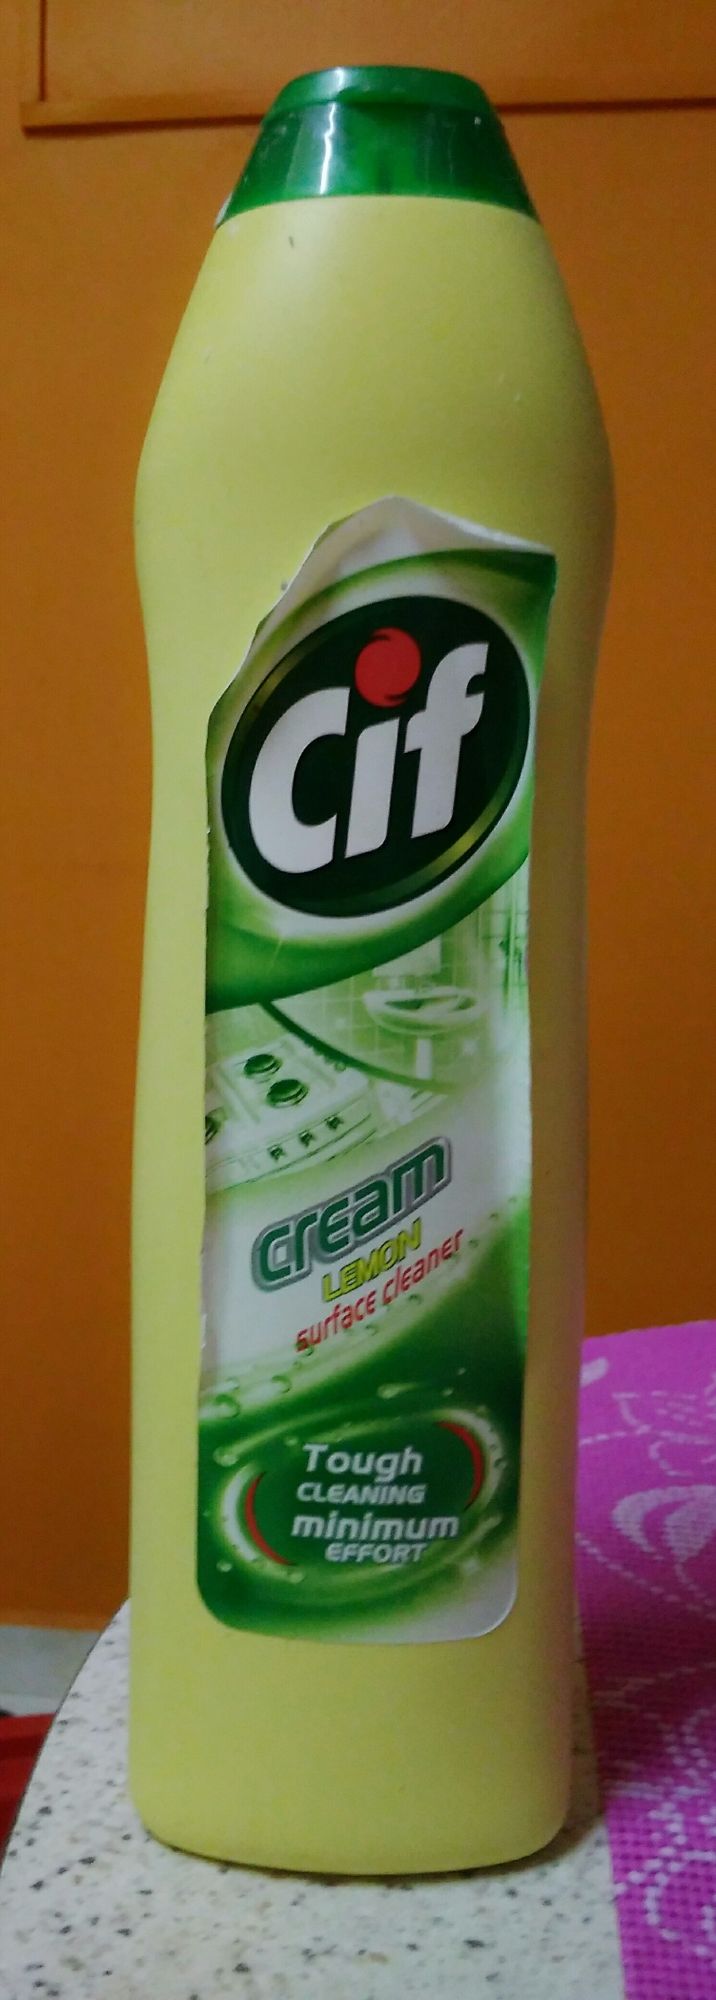 Cif Professional Cream Cleaner Lemon 2L, Commercial Professional Kitchen  and Washroom Cleaning Chemicals, Removes Scum, Water Marks, Burnt On Food,  Watermarks effortlessly - Pro Formula » Janitorial Cleaning Products UK